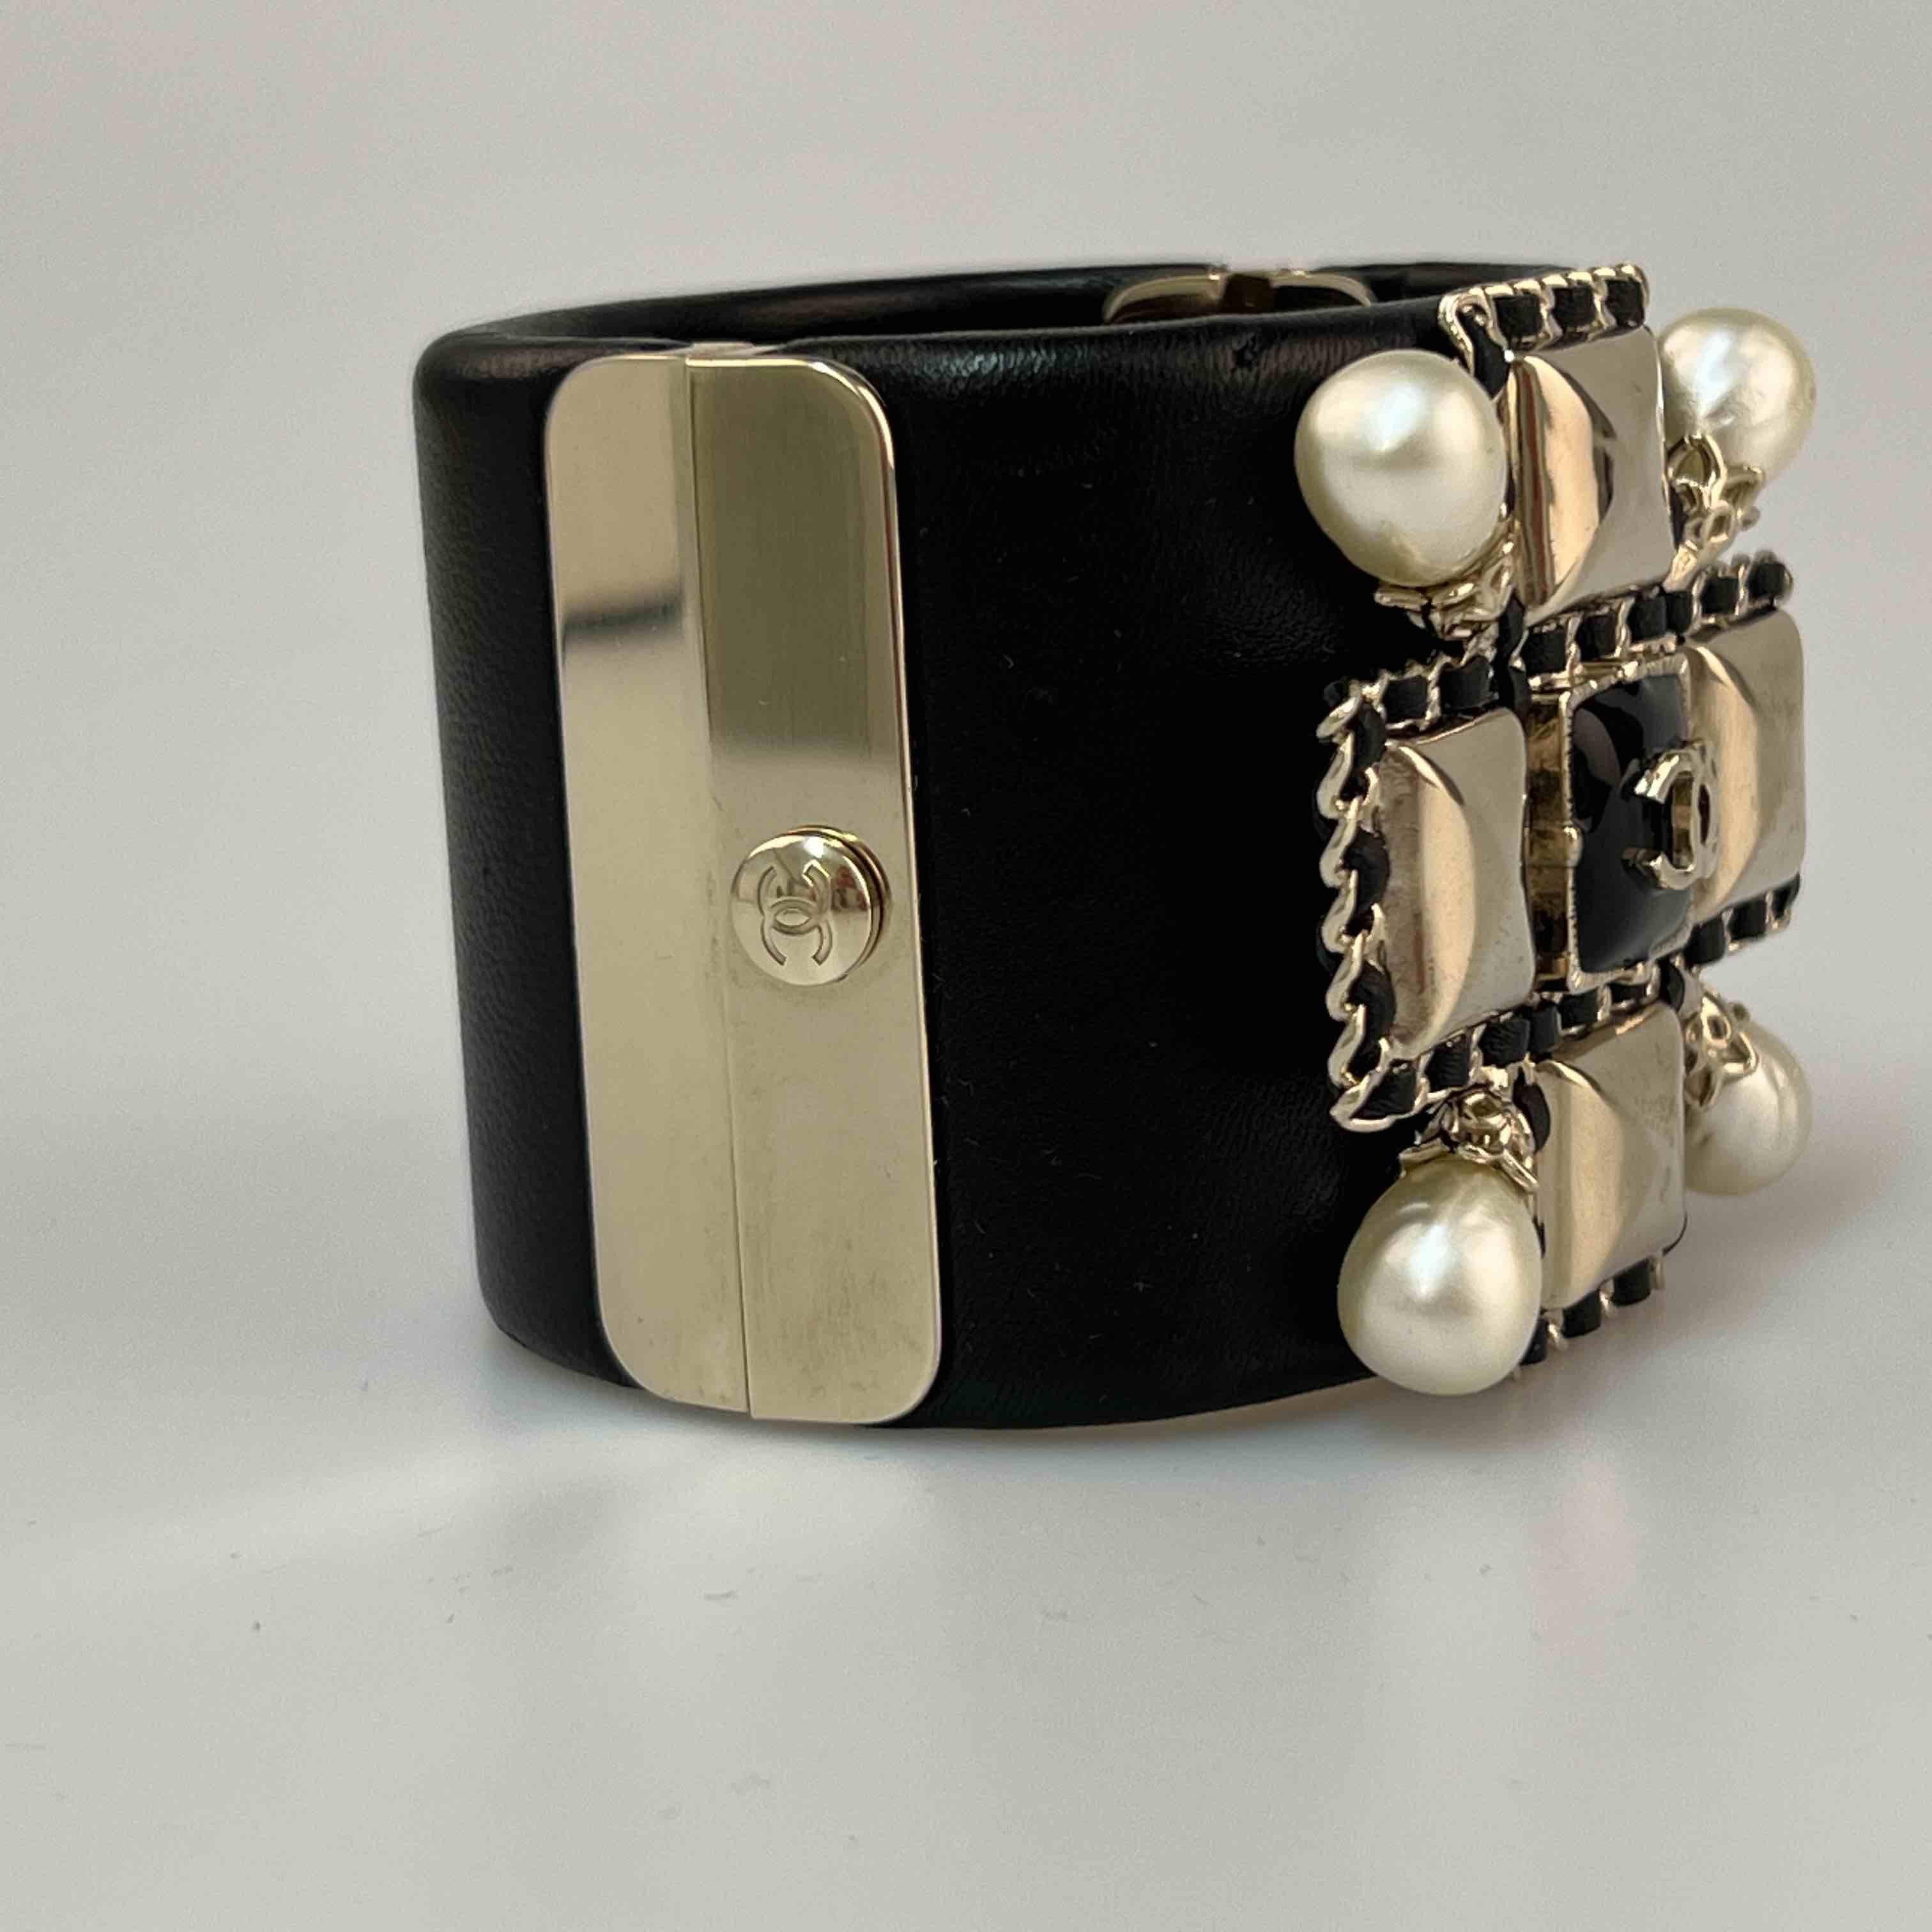 CHANEL cuff bracelet in black leather, gilt metal and pearls.
In very good condition.
Made in Italy.
Dimensions: height 5 cm, wrist circumference: 16.5 cm.
Stamp: yes.
Year: Spring 2020.

Will be delivered in its original box.